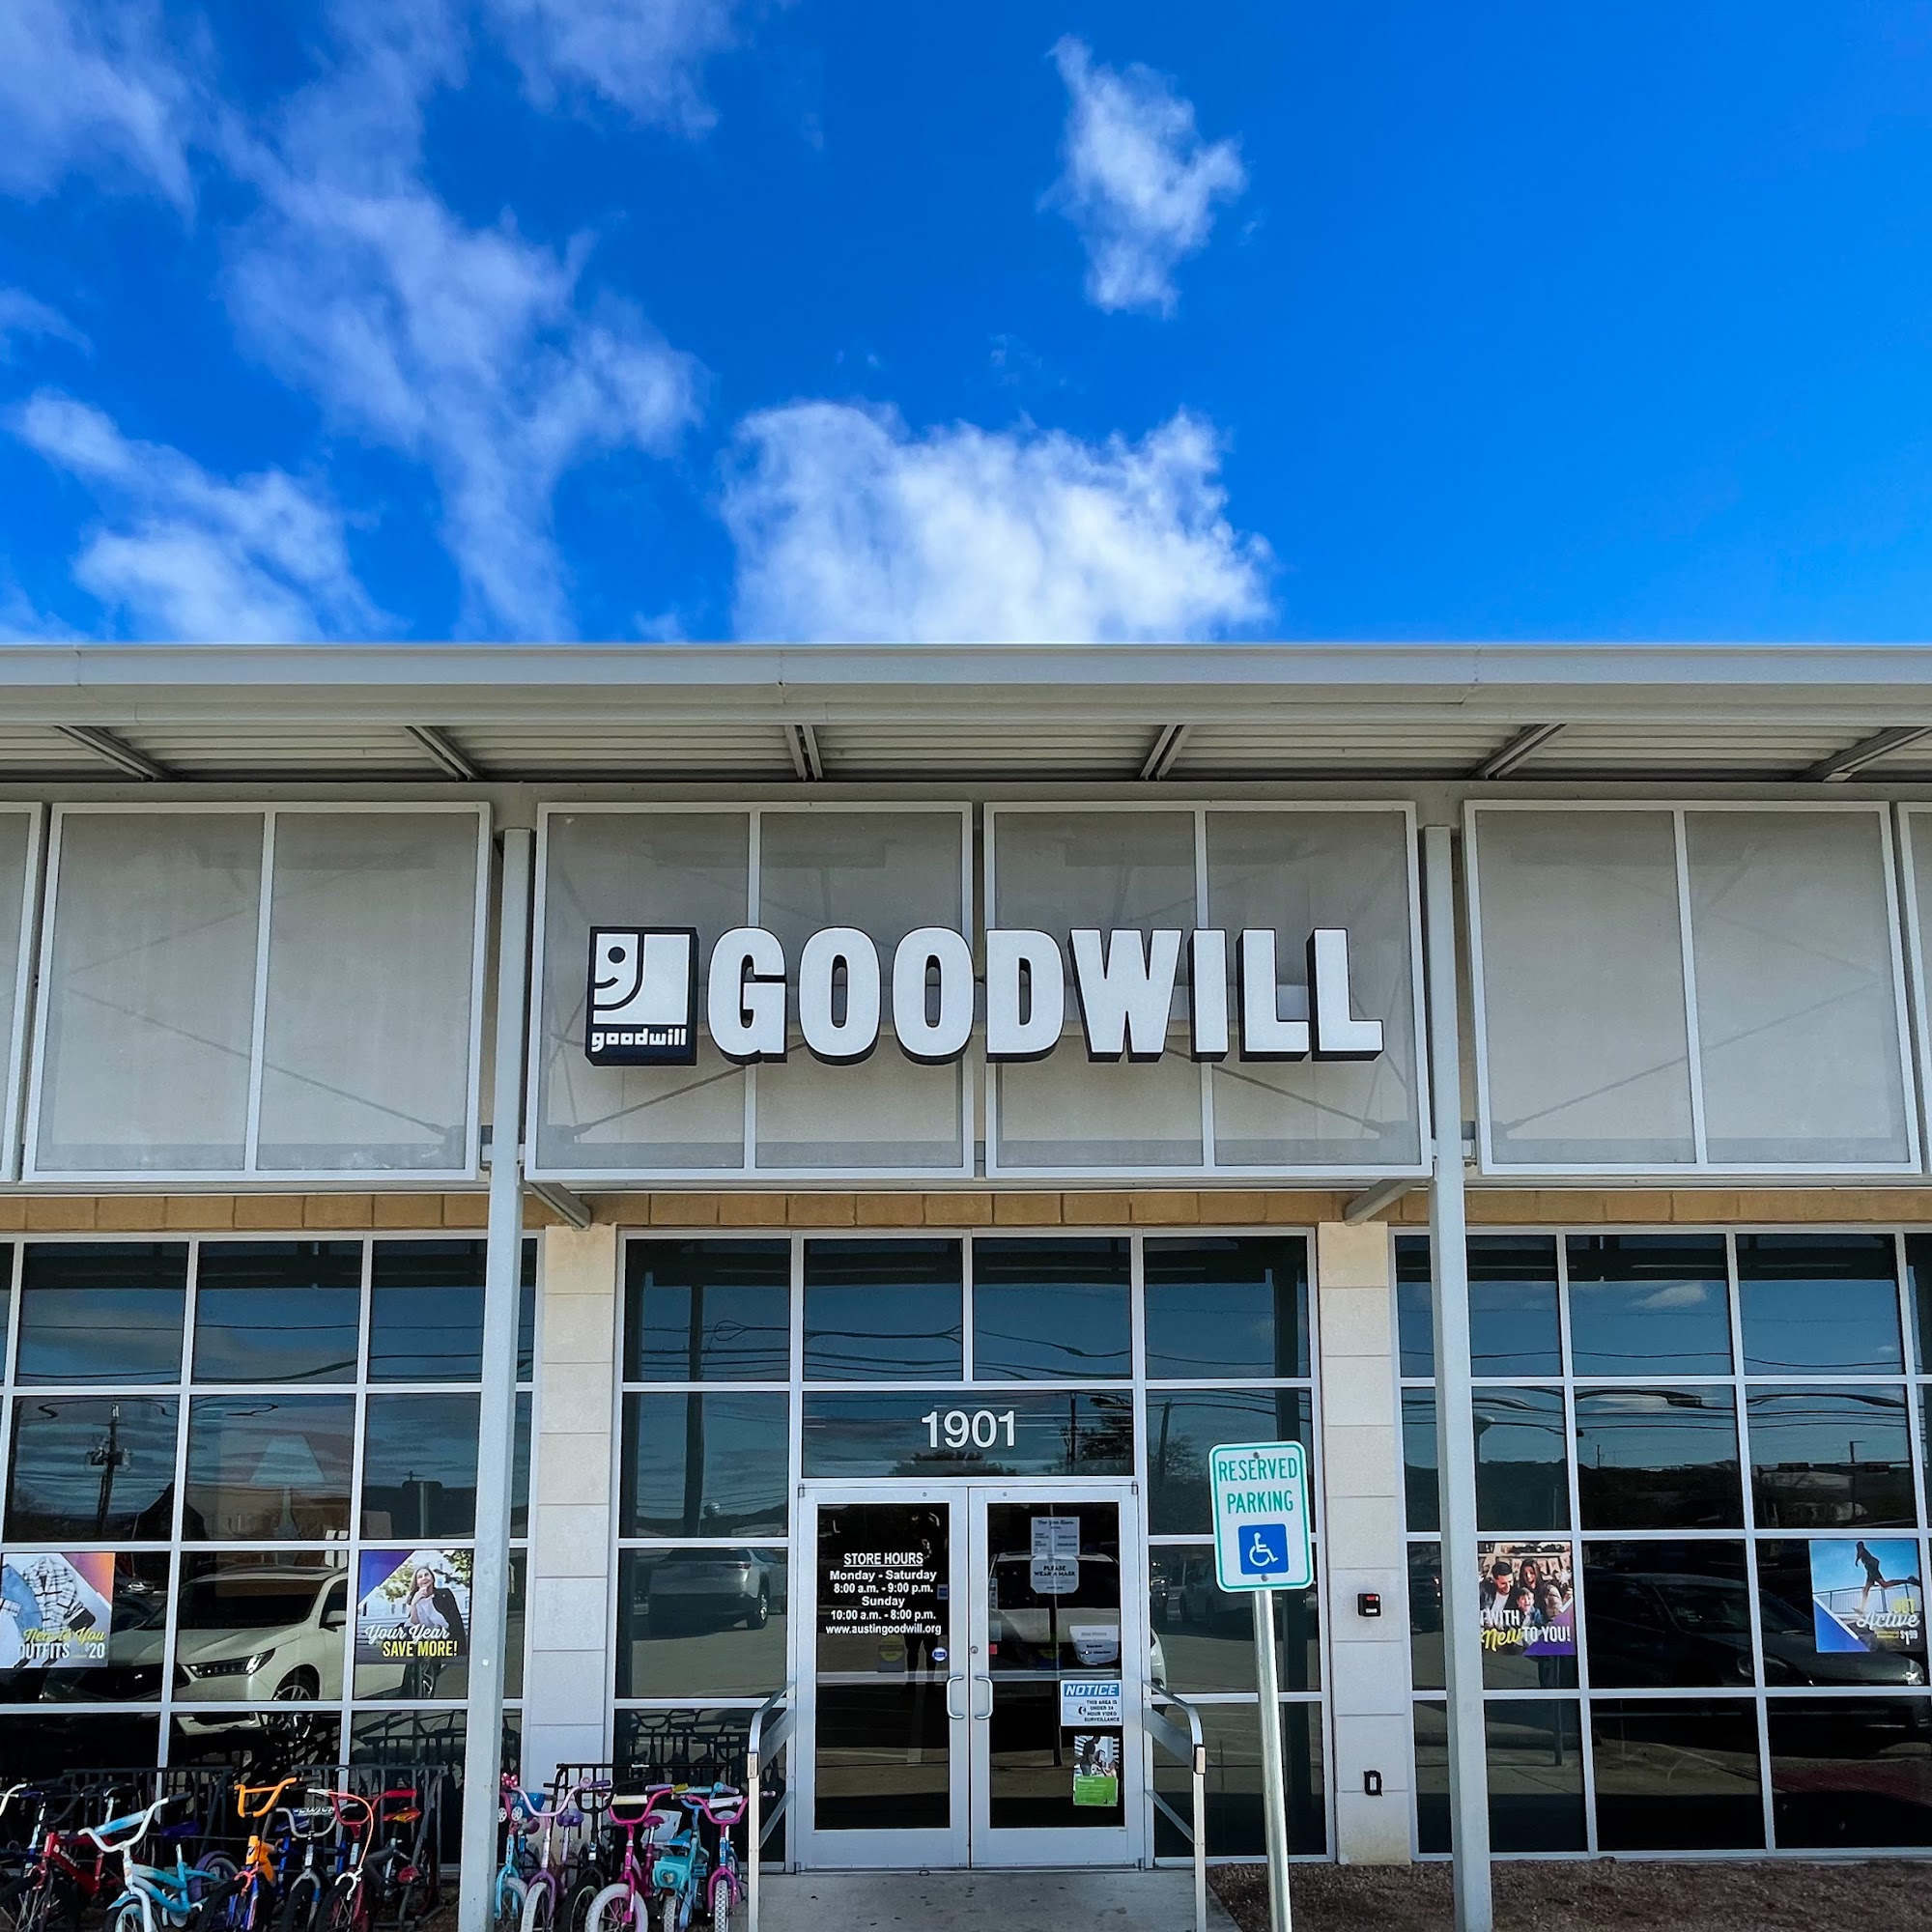 Goodwill Central Texas - Lakeway